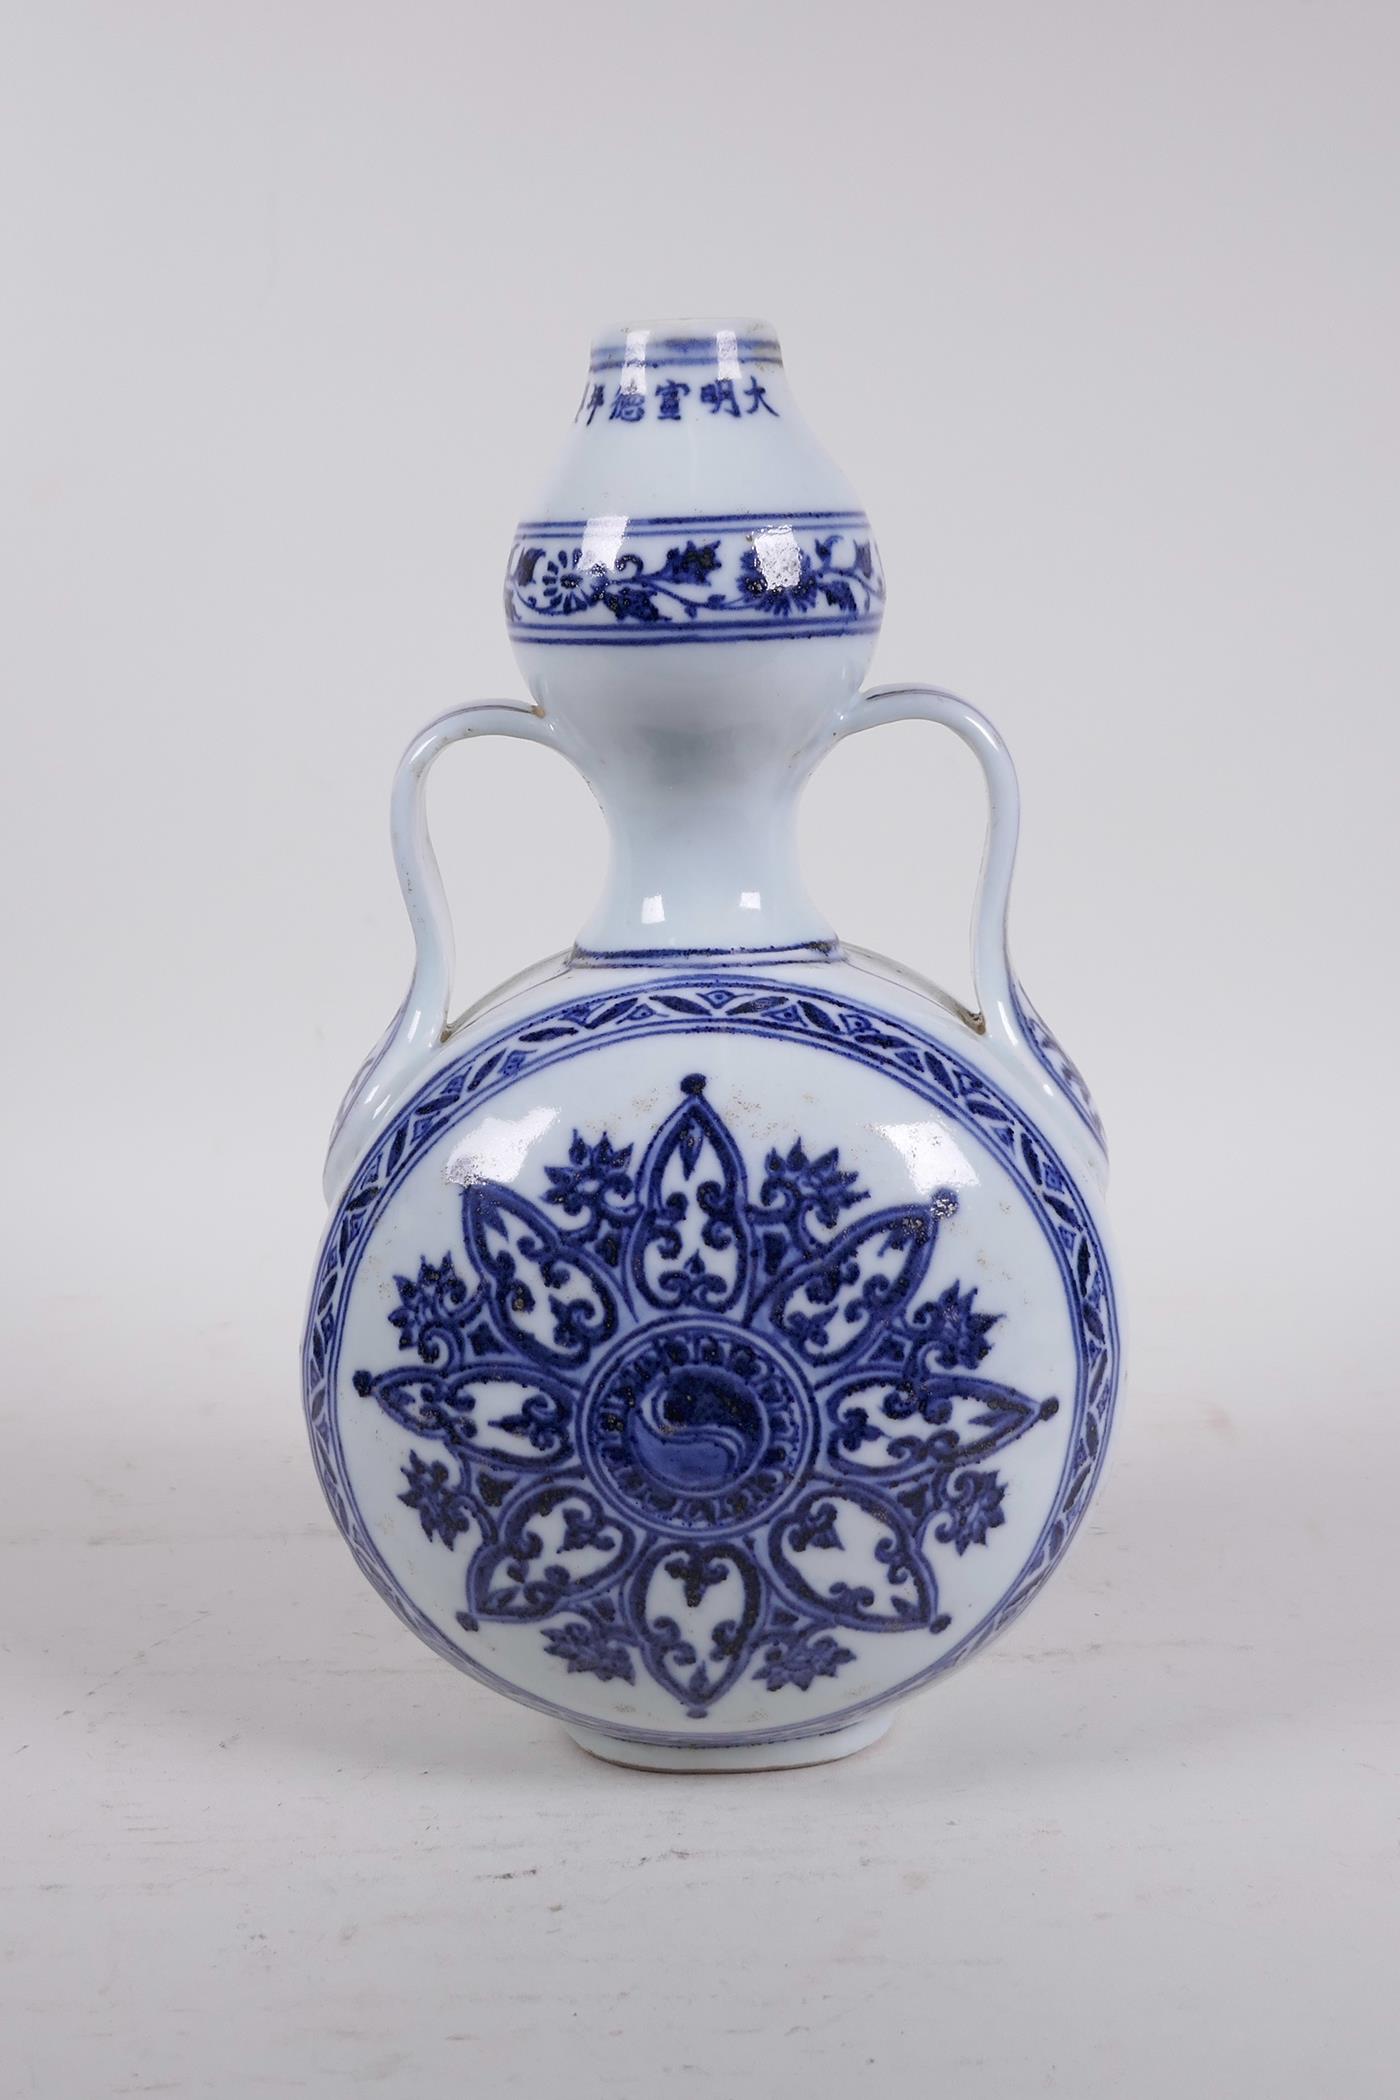 A Chinese blue and white porcelain garlic head shaped flask with two handles and Yin Yang